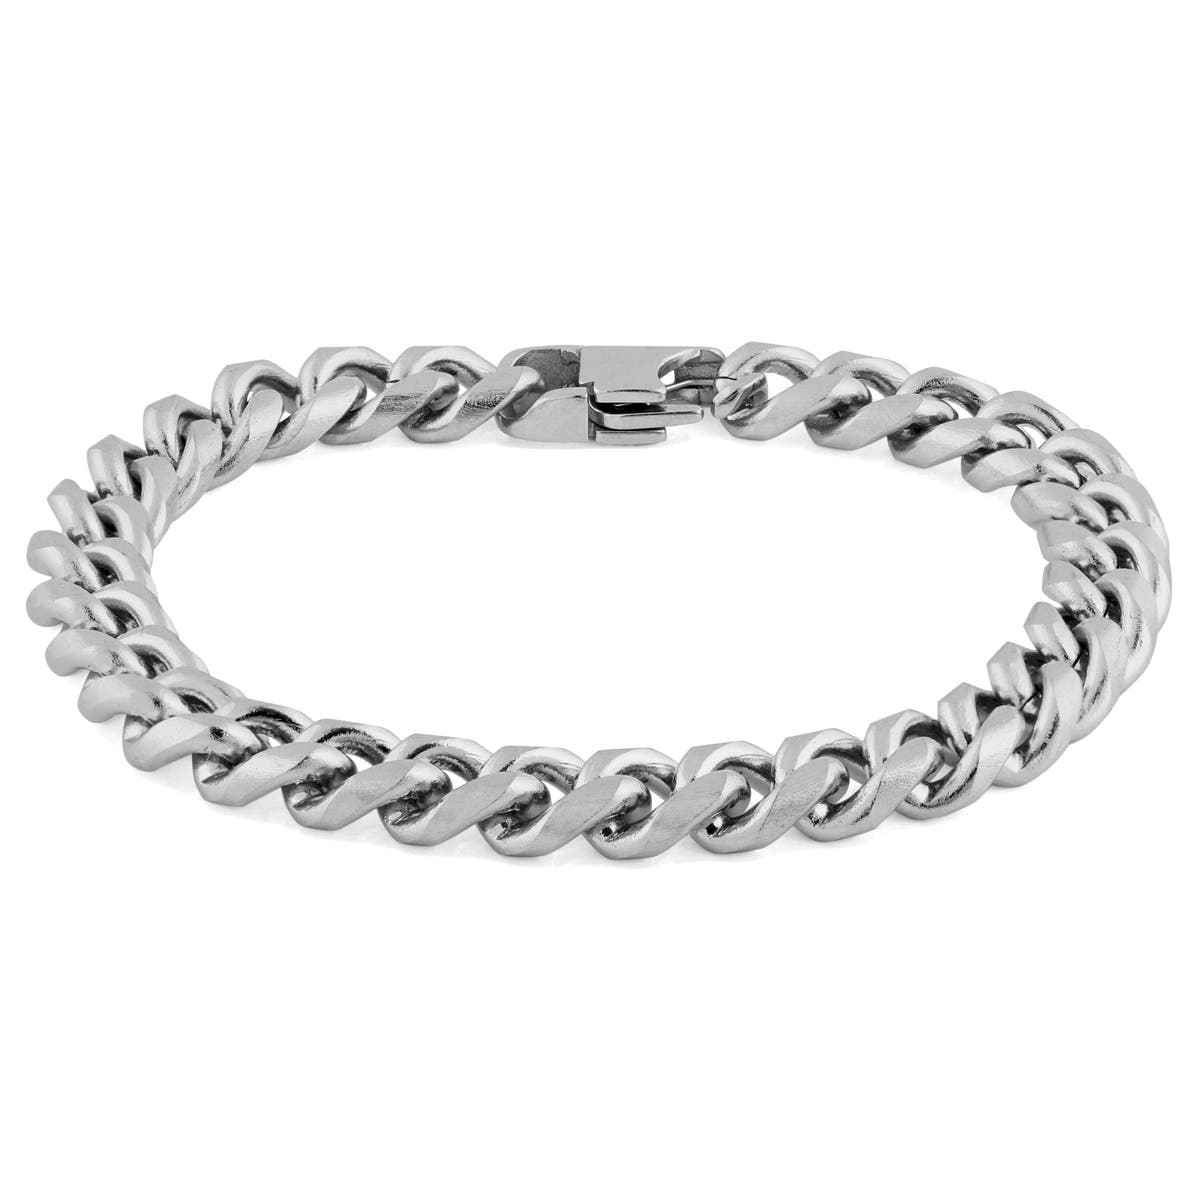 8 mm Silver-Tone Chain Bracelet | In stock! | Lucleon